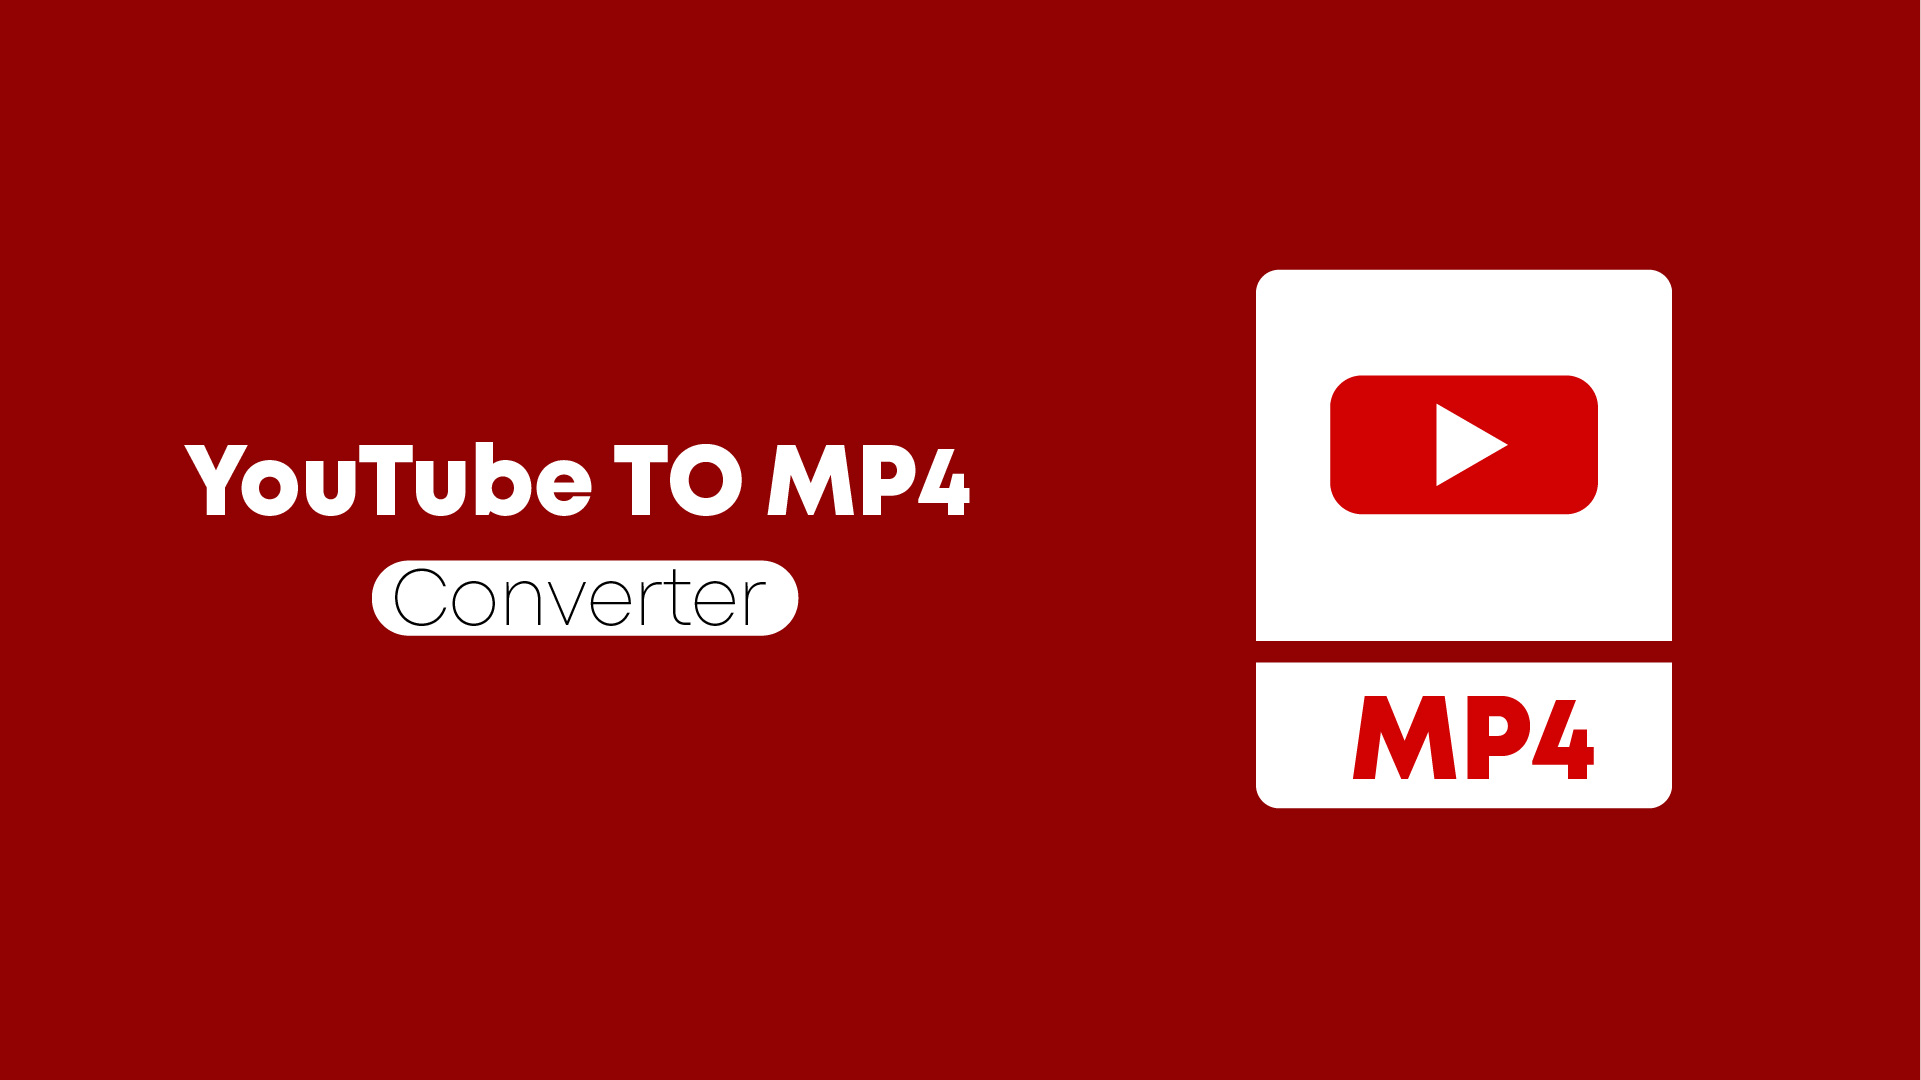 How to Convert YouTube to MP4 Safely?